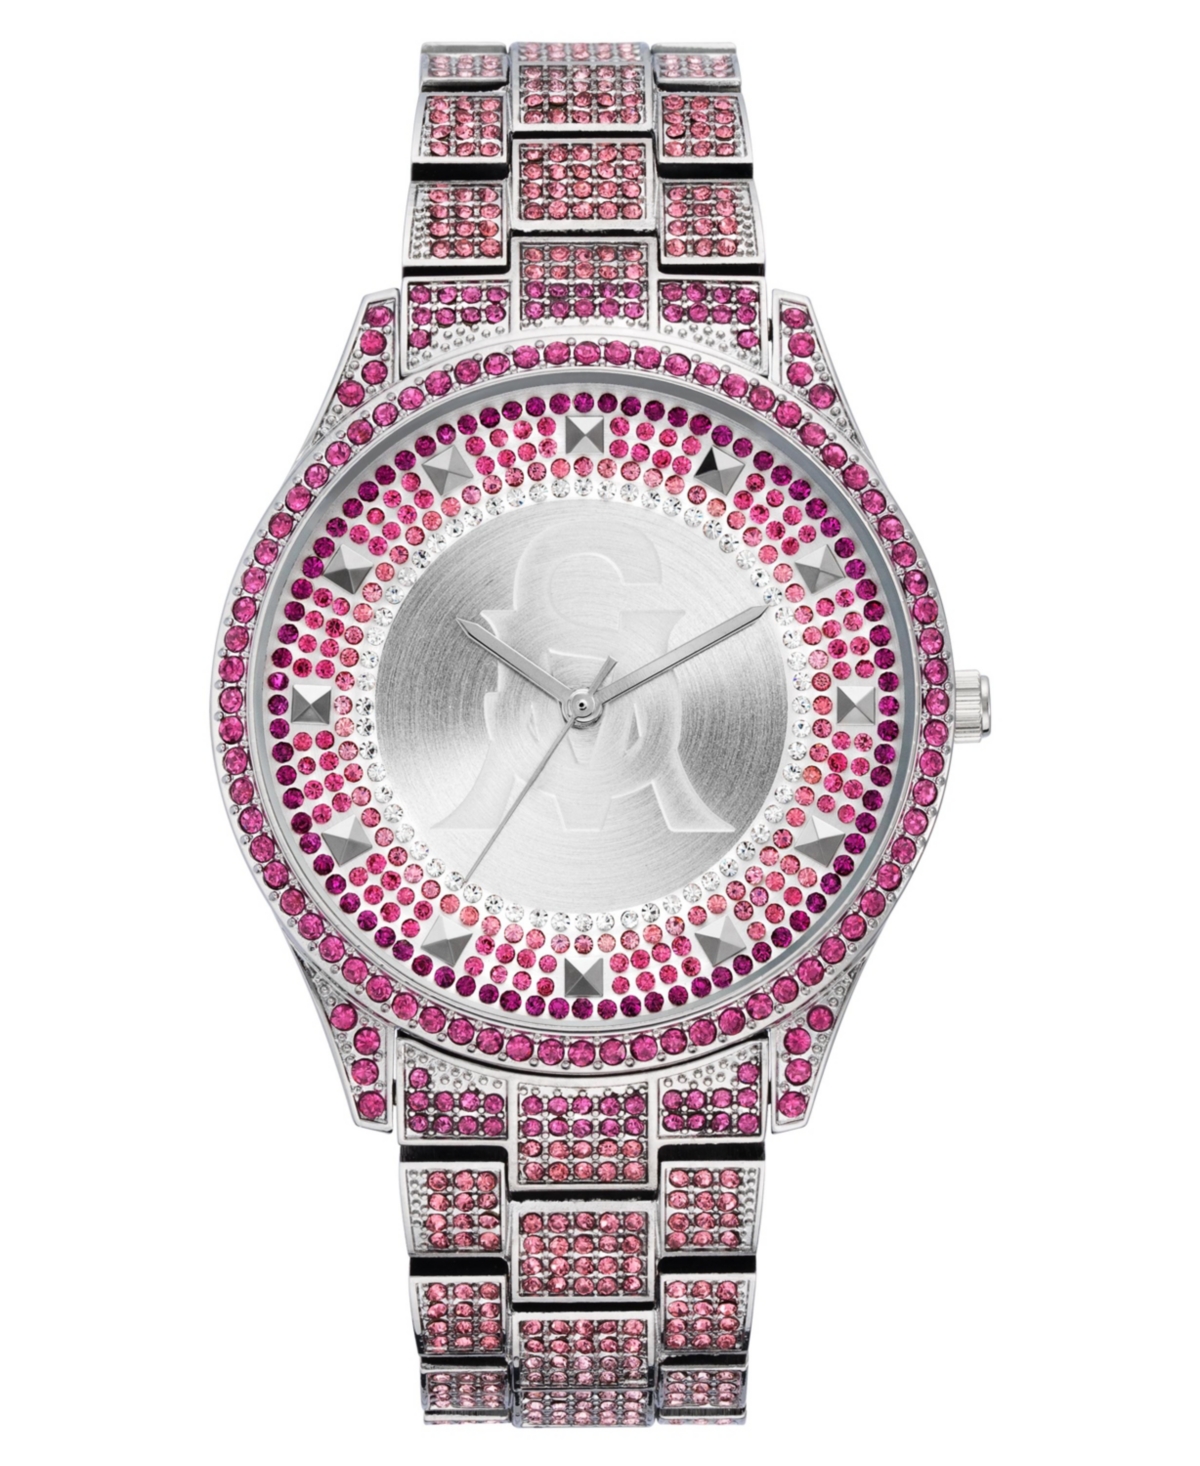 Women's Silver-Tone Metal Bracelet and Accented with Pink Crystals Watch, 40mm - Silver-Tone, Pink